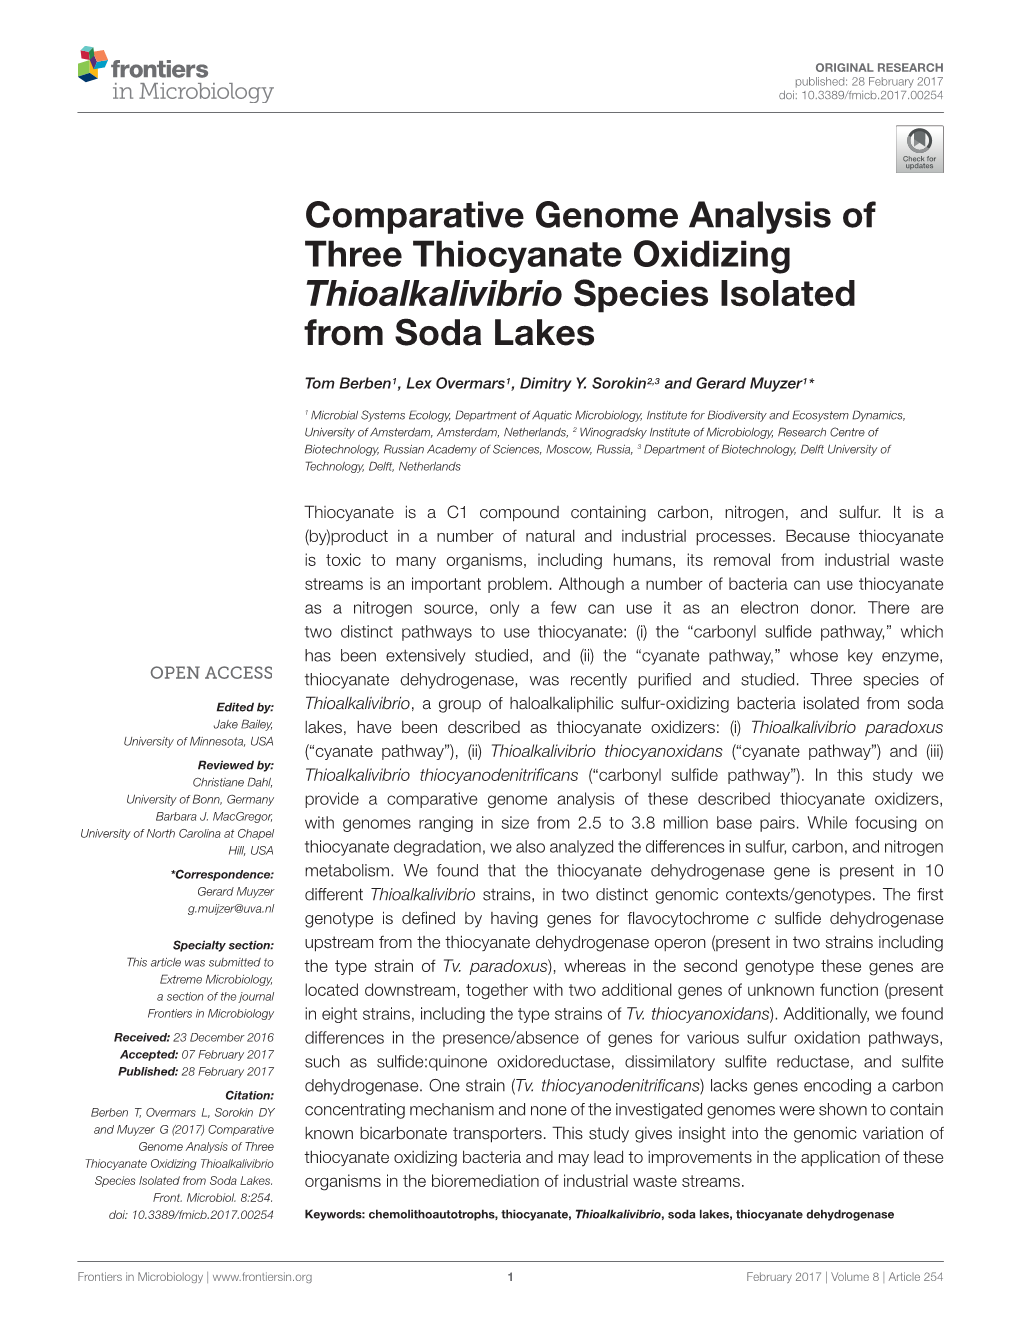 Comparative Genome Analysis of Three Thiocyanate Oxidizing Thioalkalivibrio Species Isolated from Soda Lakes